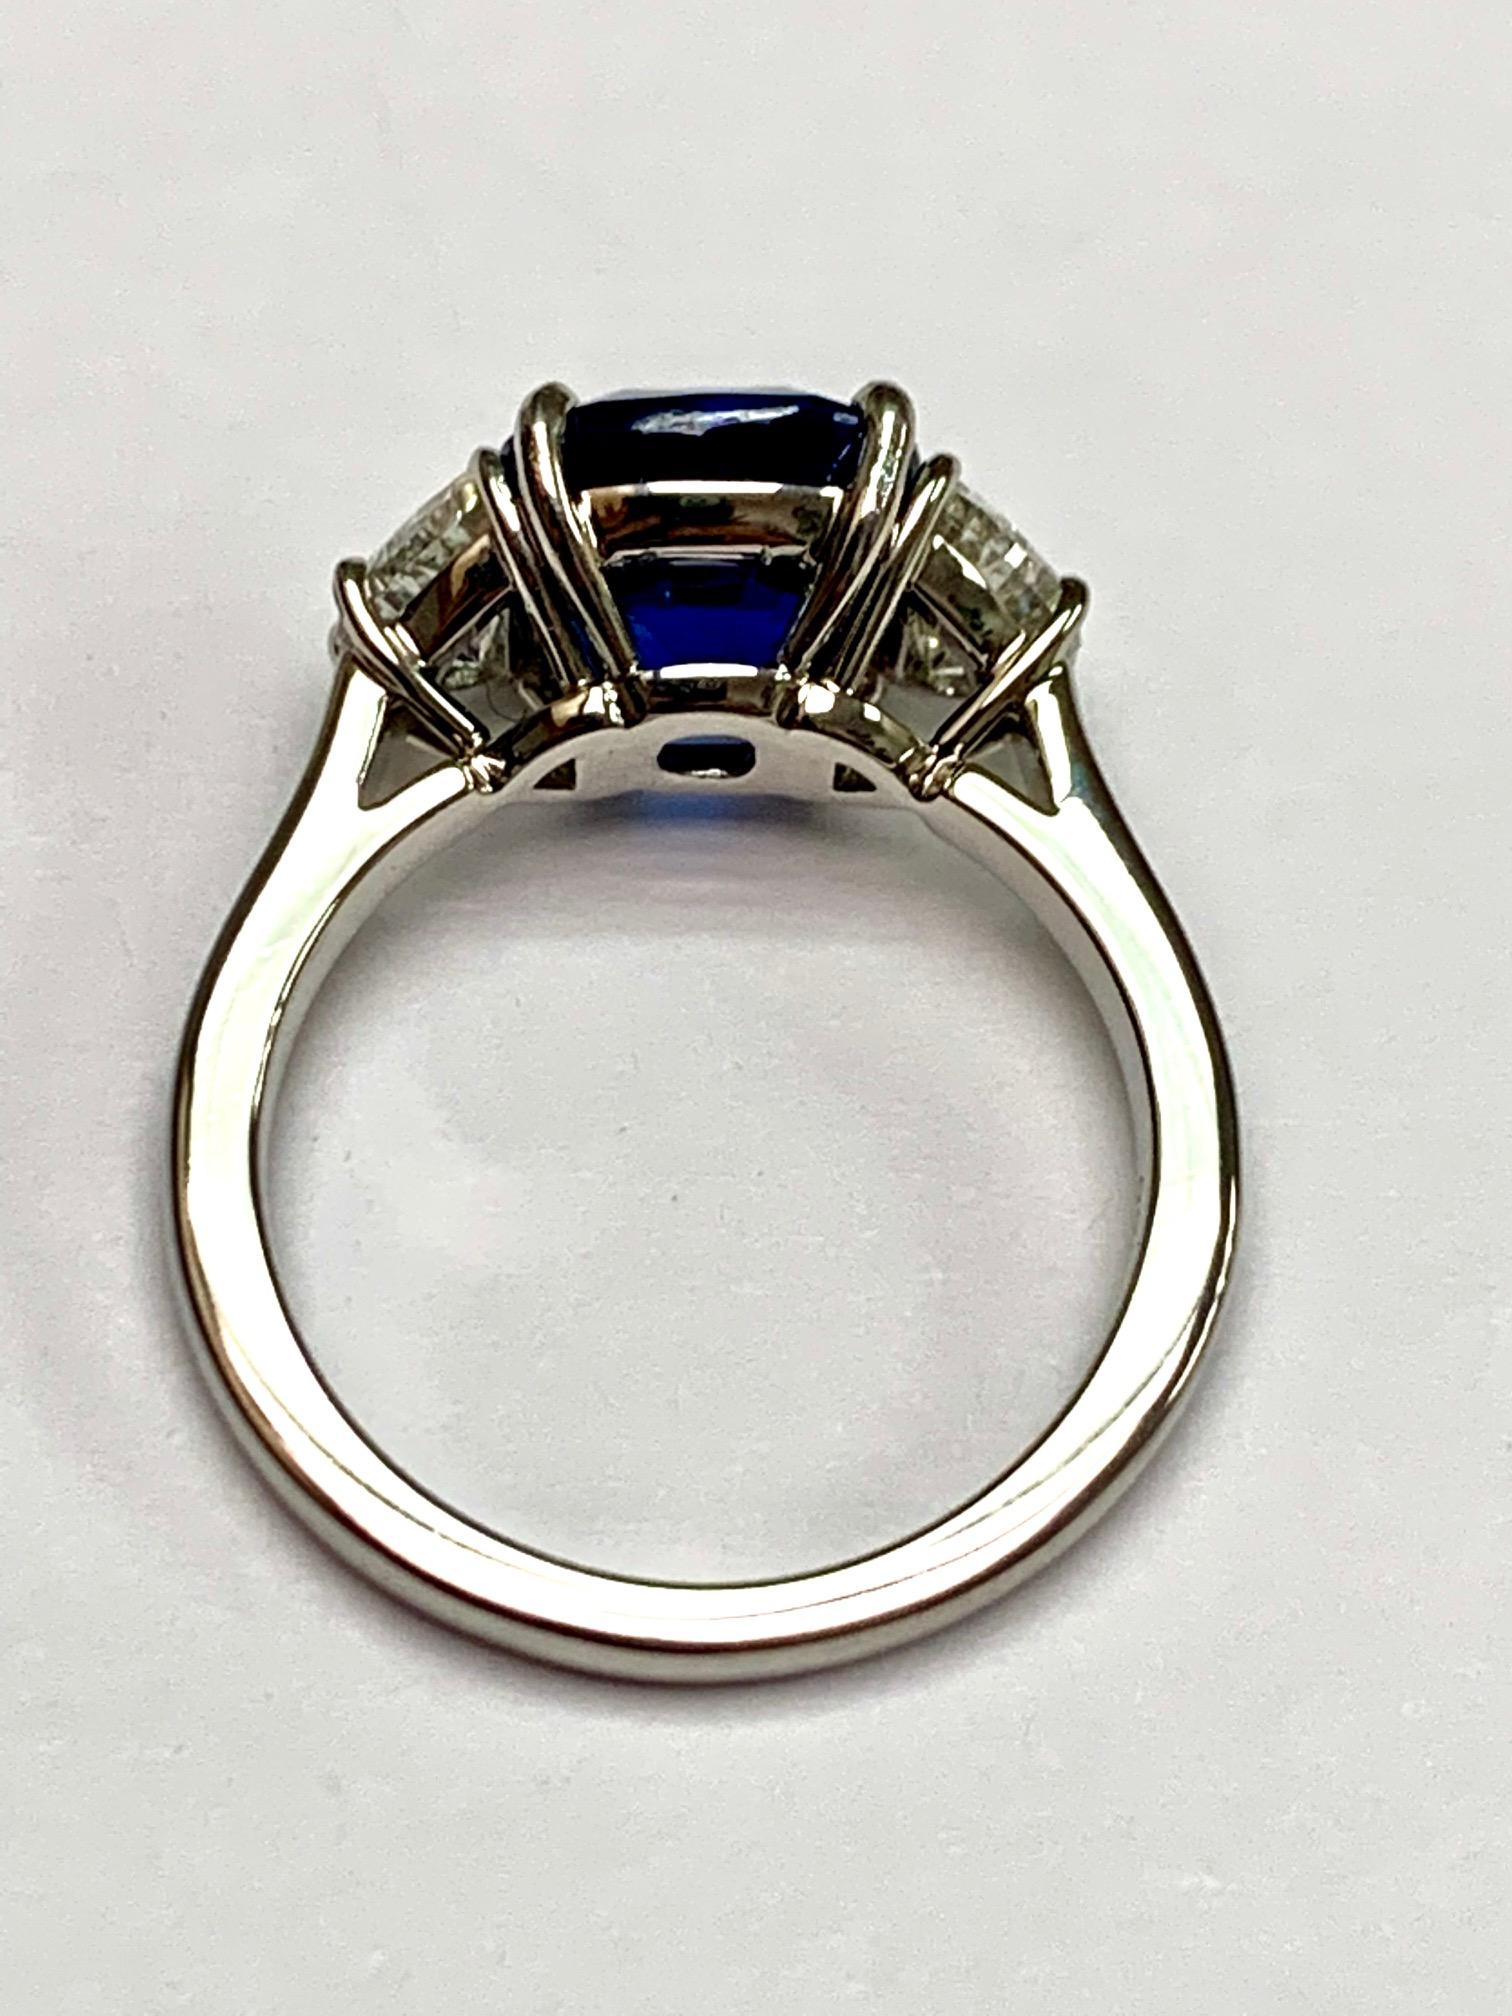 Antique Cushion Cut CDC Certified 4.01 Carat Sapphire Diamond Cocktail Ring For Sale